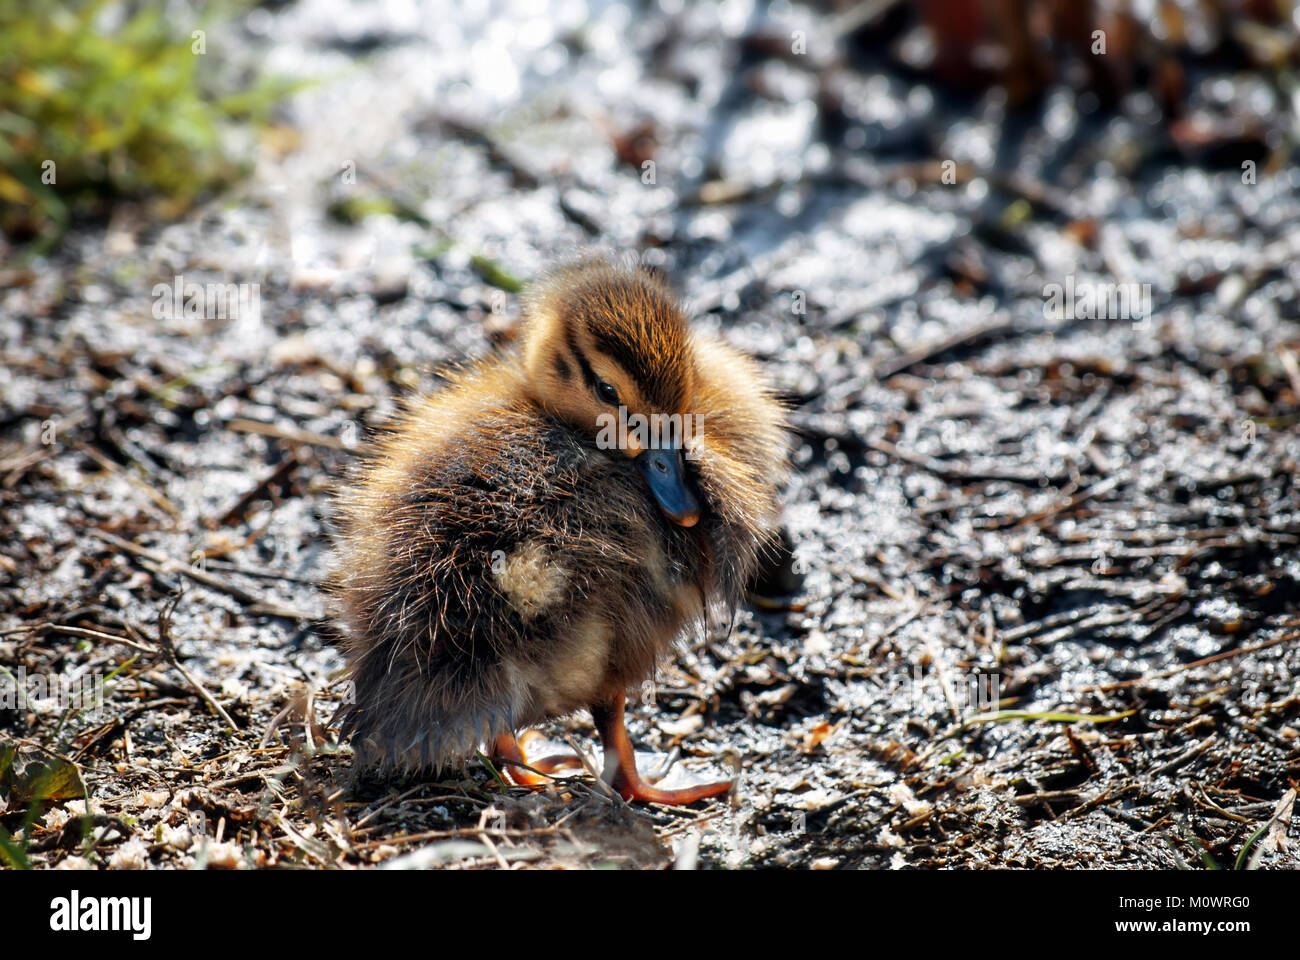 A fluffy Mallard duckling in brown and gold hues on a muddy bank in Spring, with dappled sunlight. Stock Photo